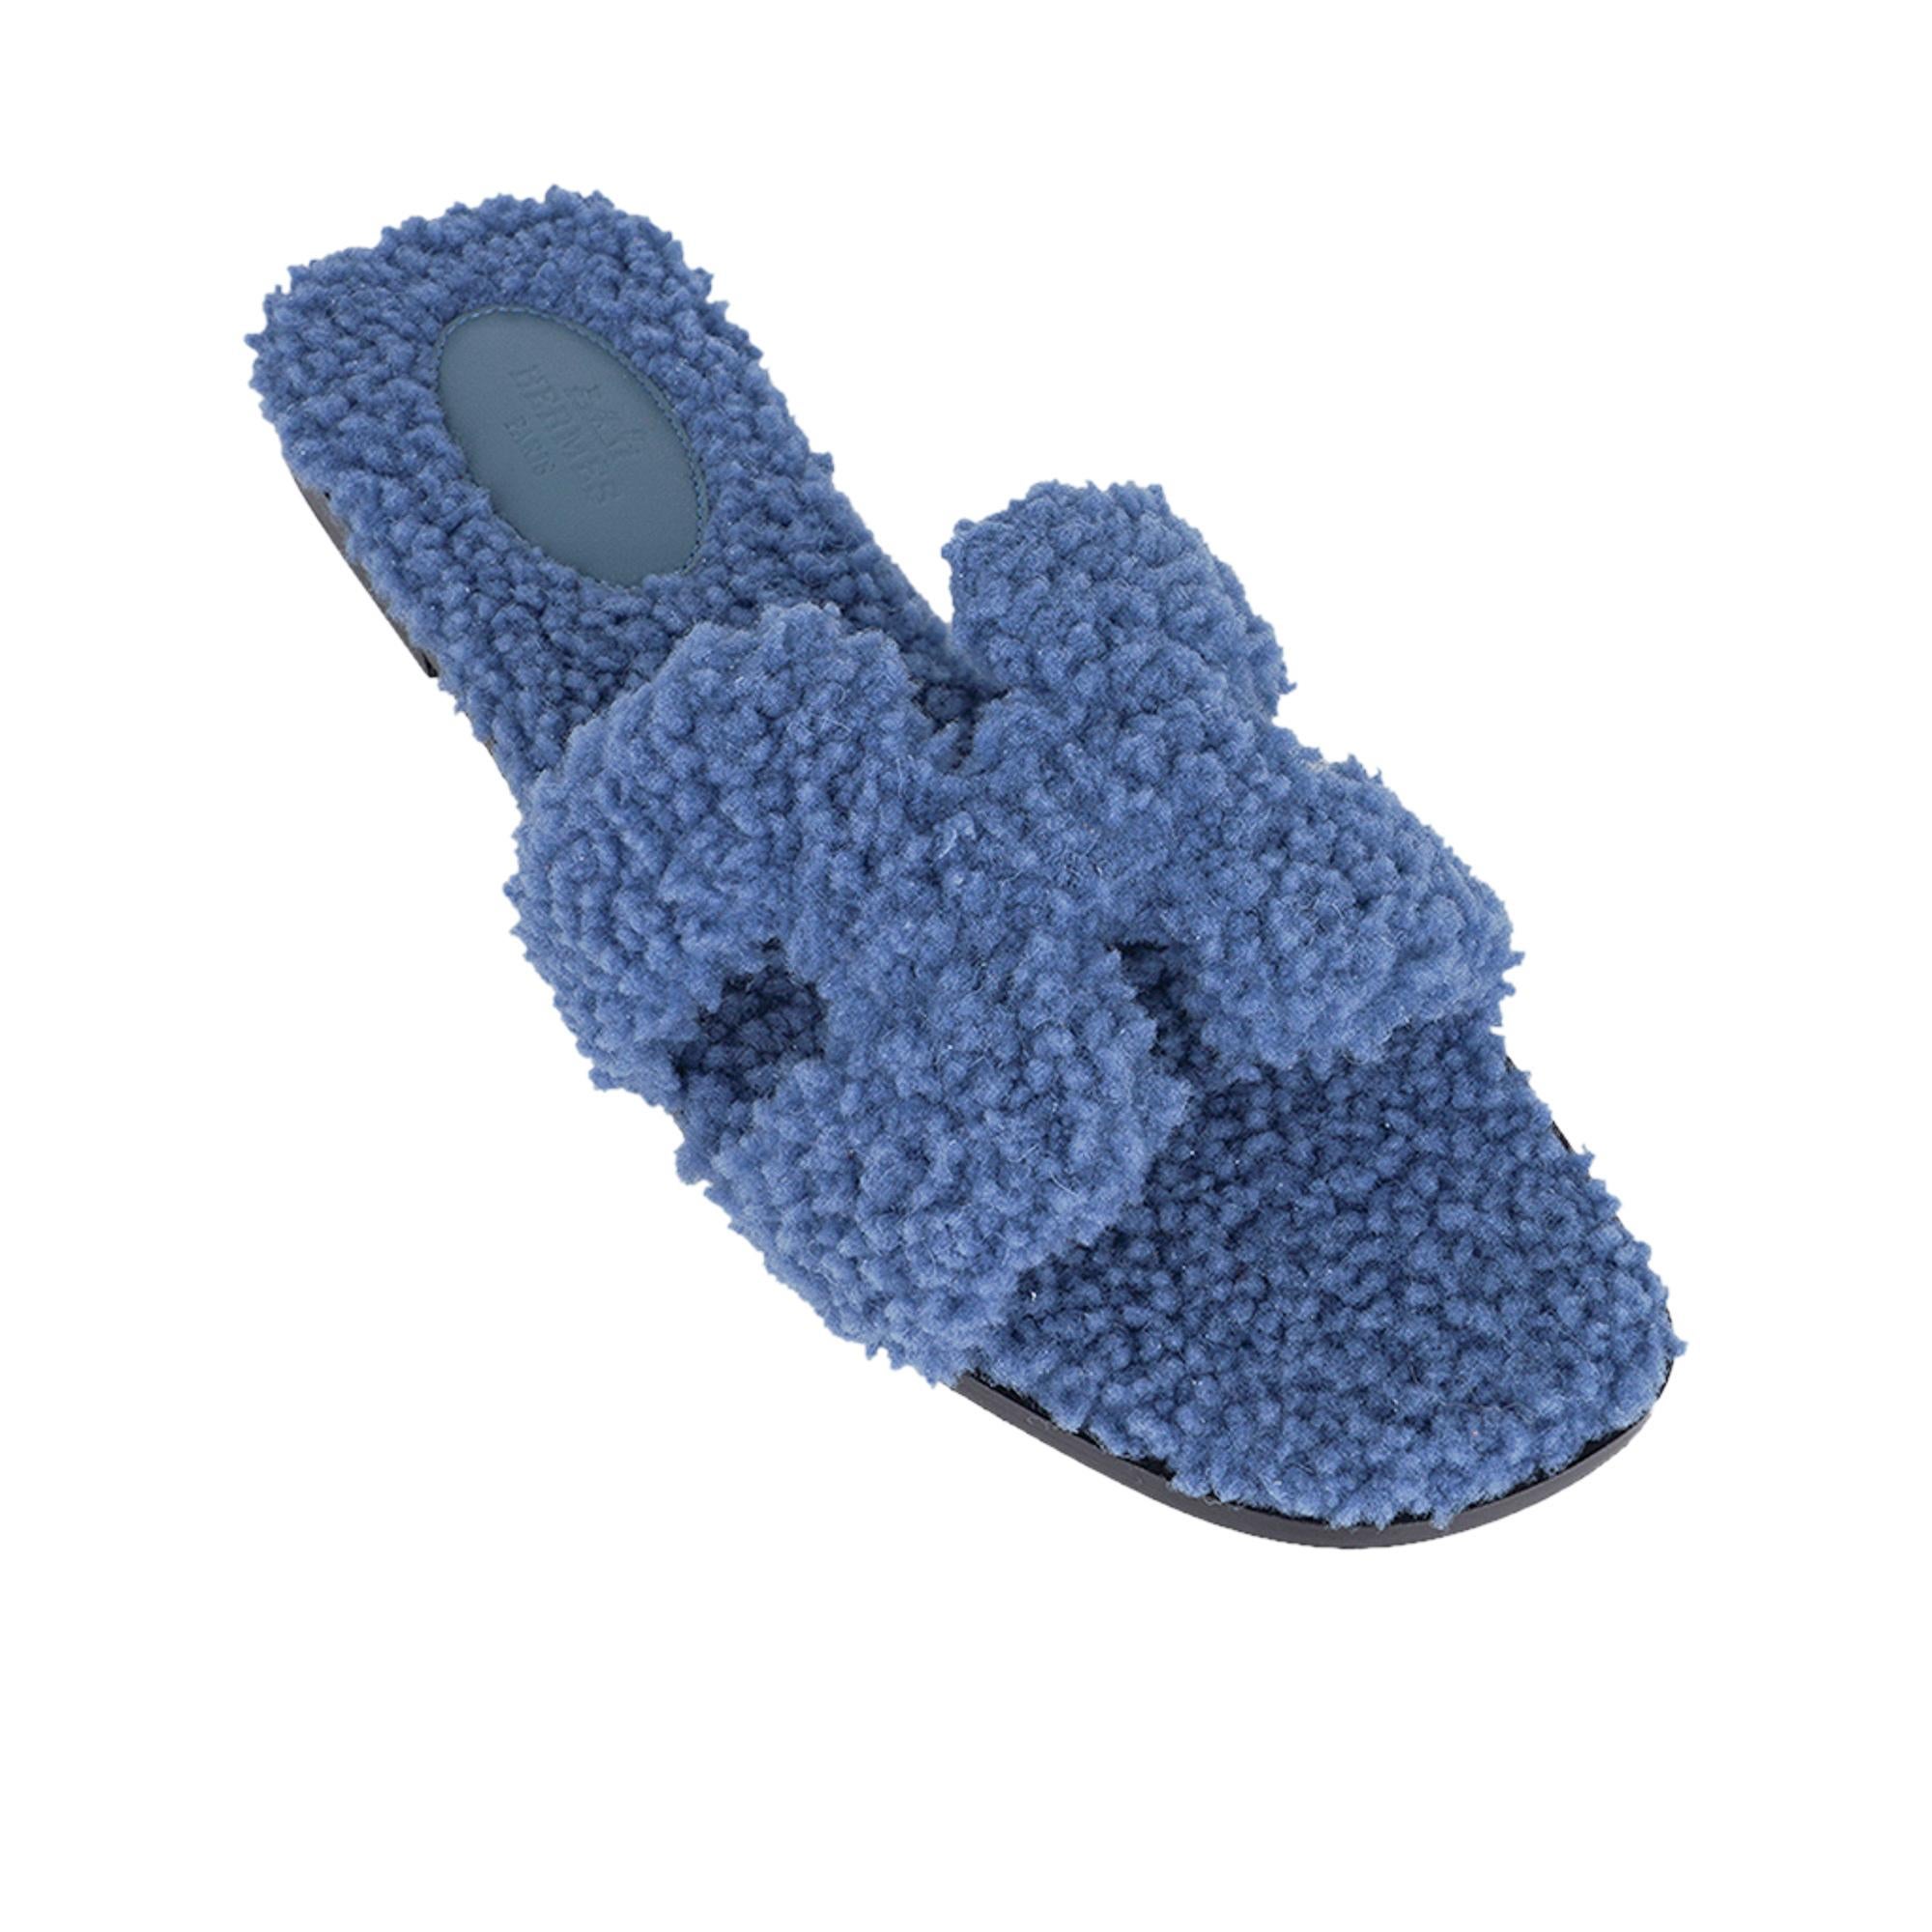 Mightychic offers a pair of Hermes Oran Shearling limited edition flat sandal slide featured in Bleu.
This stunning muted blue Hermes Oran shearling sandal is foot flirting perfection!
Embossed Hermes Paris leather insole.
Wood heel.
Comes with